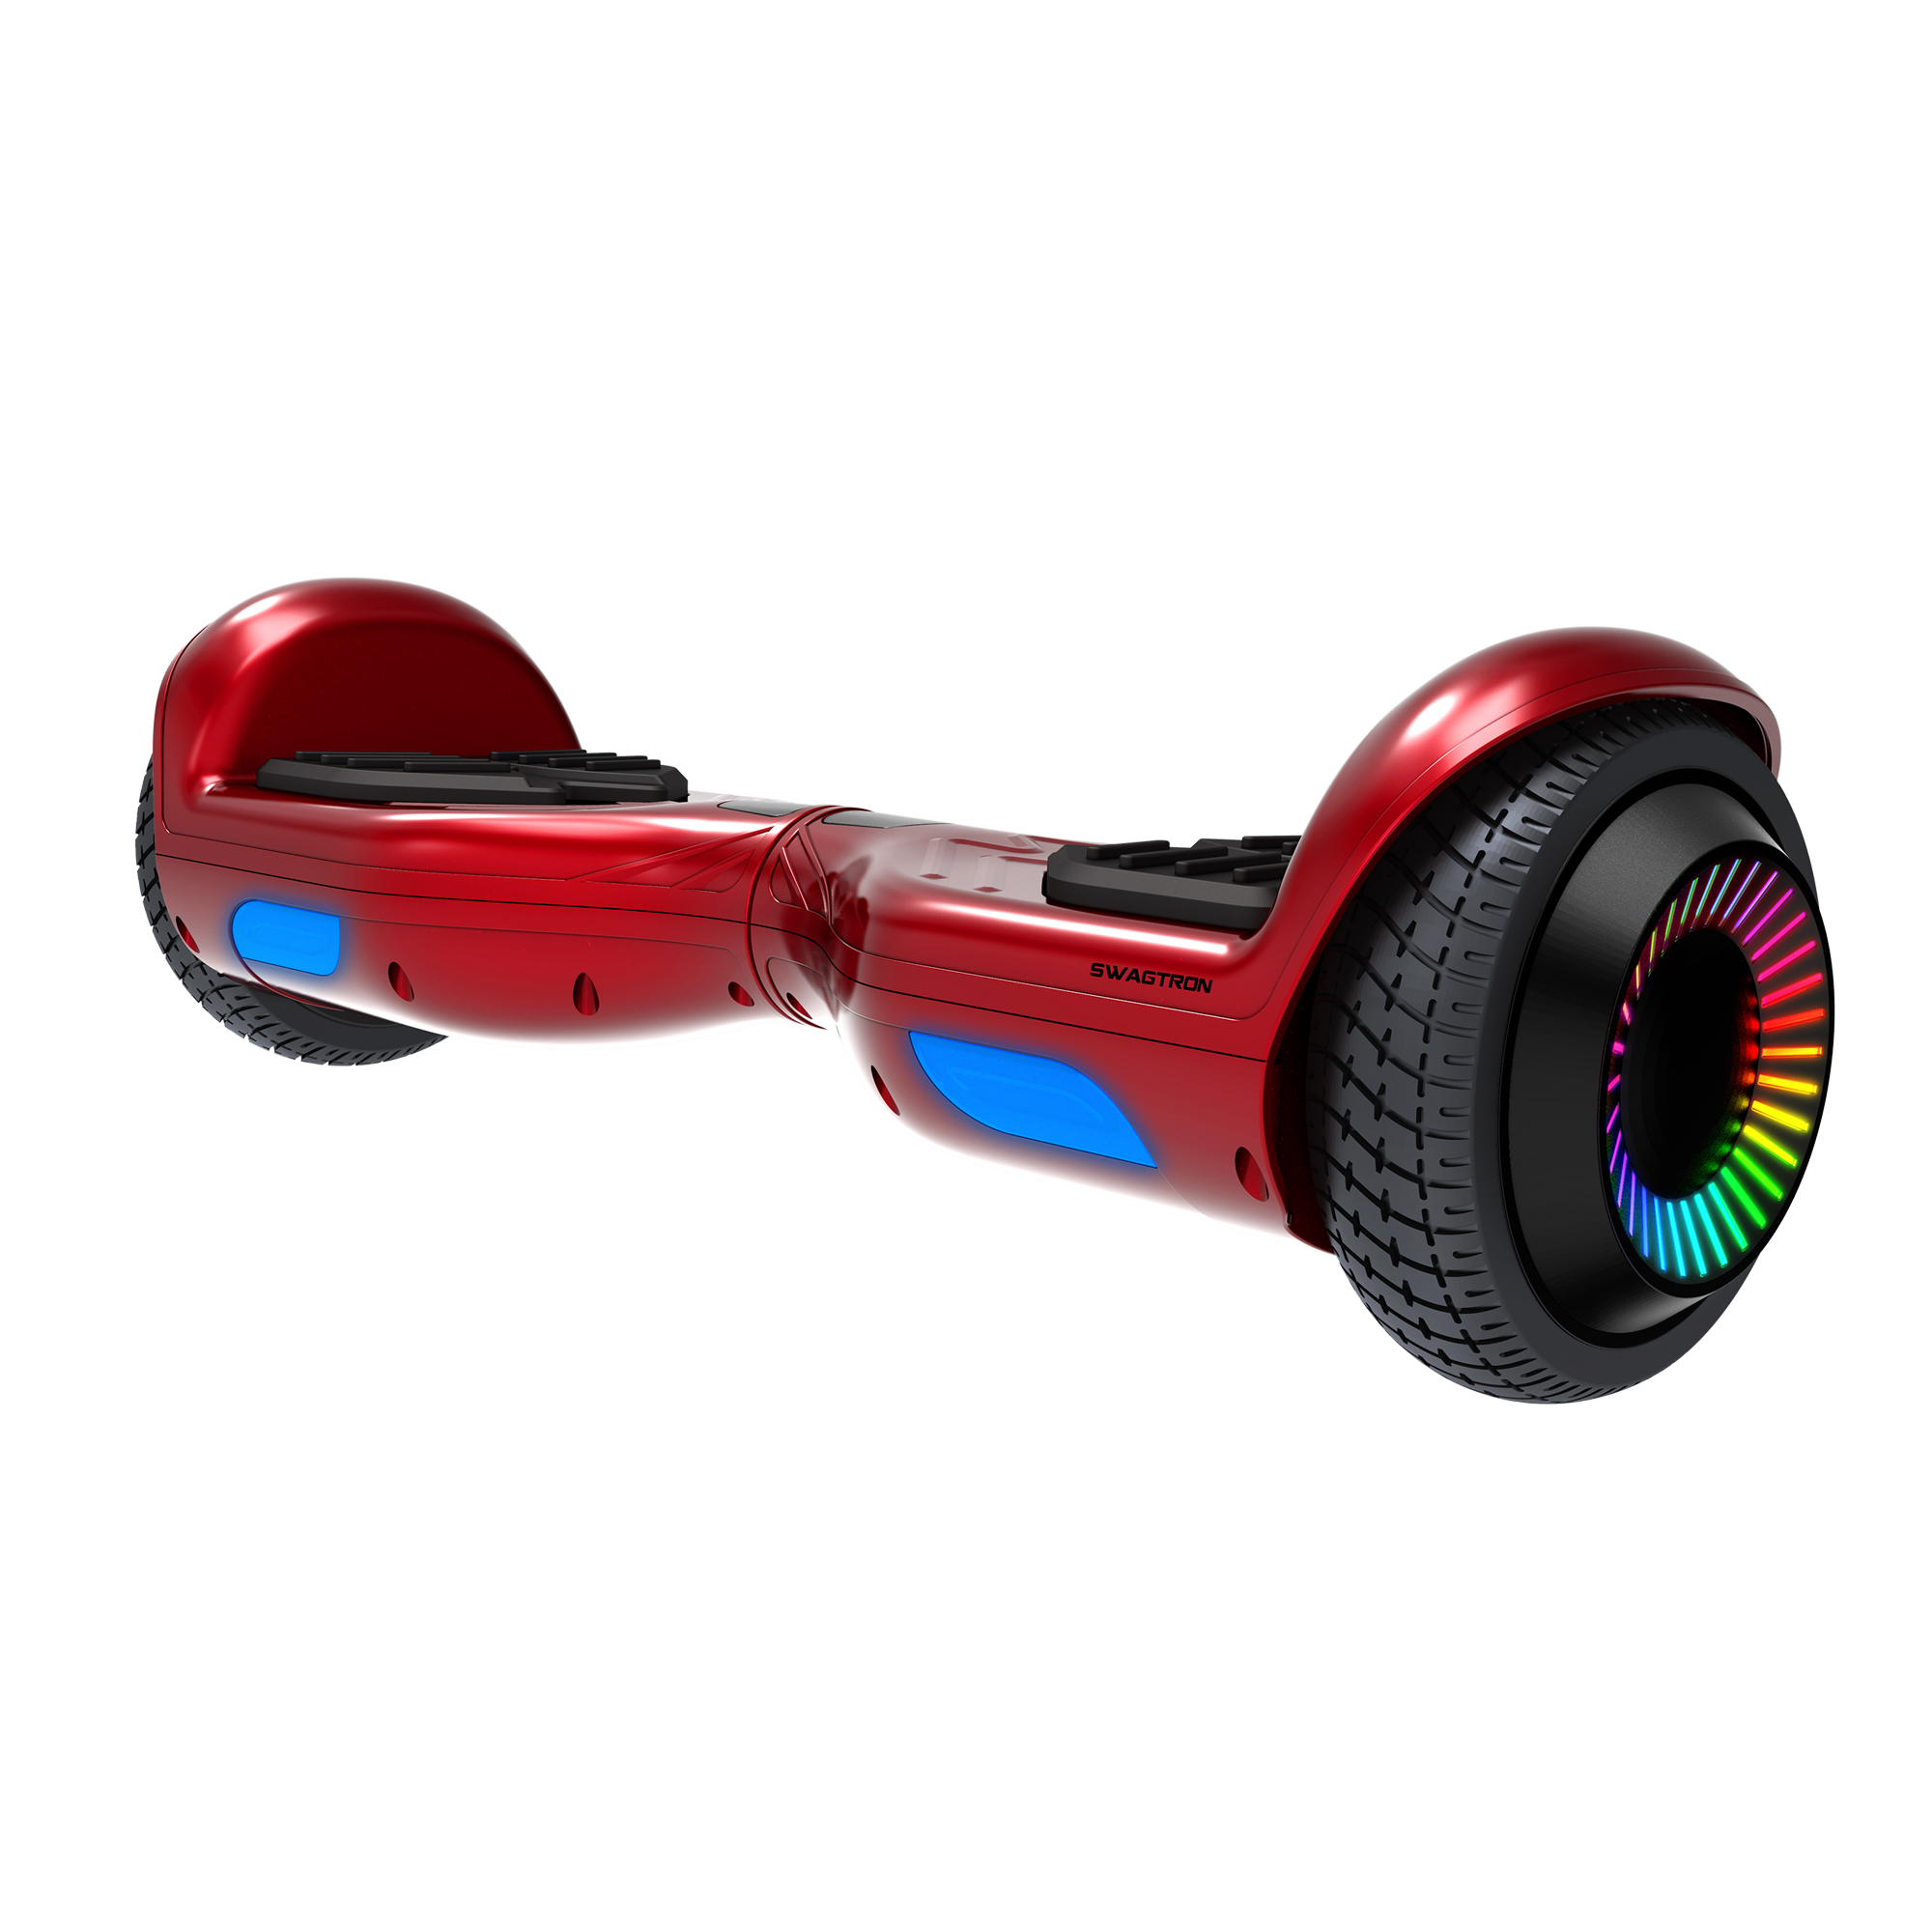 The SWAGTRON Twist Remix kids hoverboard is less than $100 during Black Friday / Cyber Monday sales.